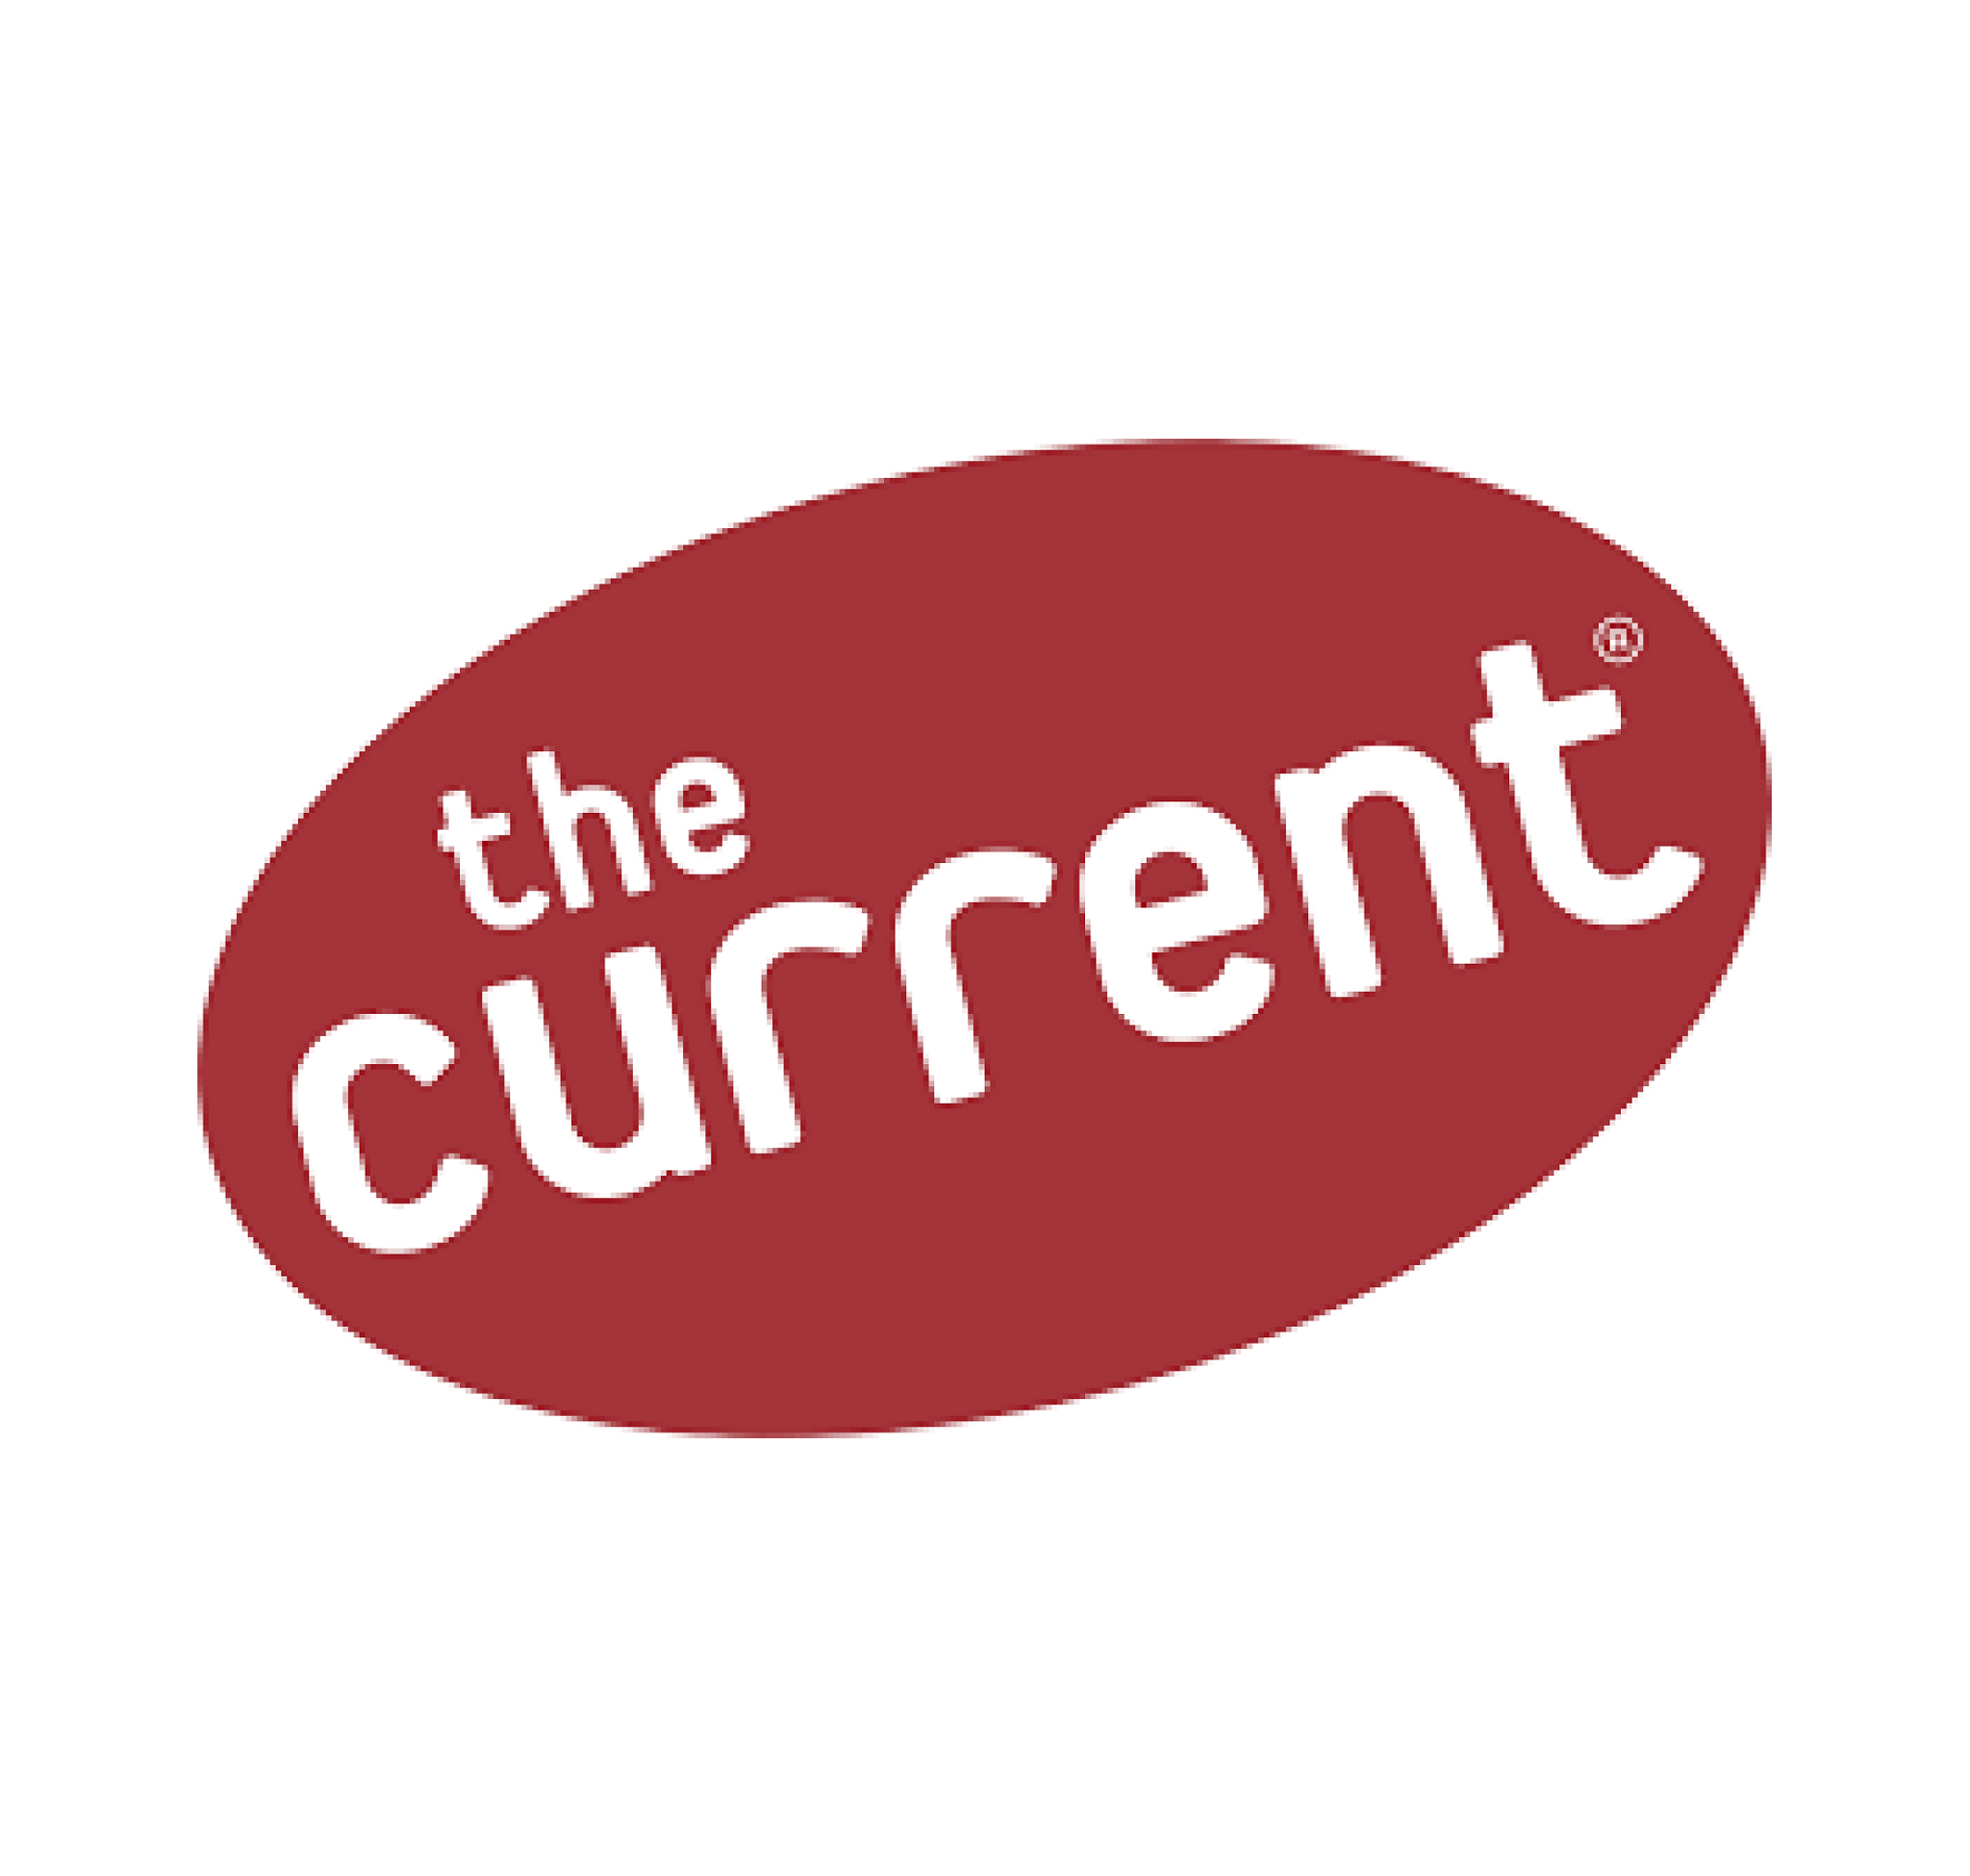 The current